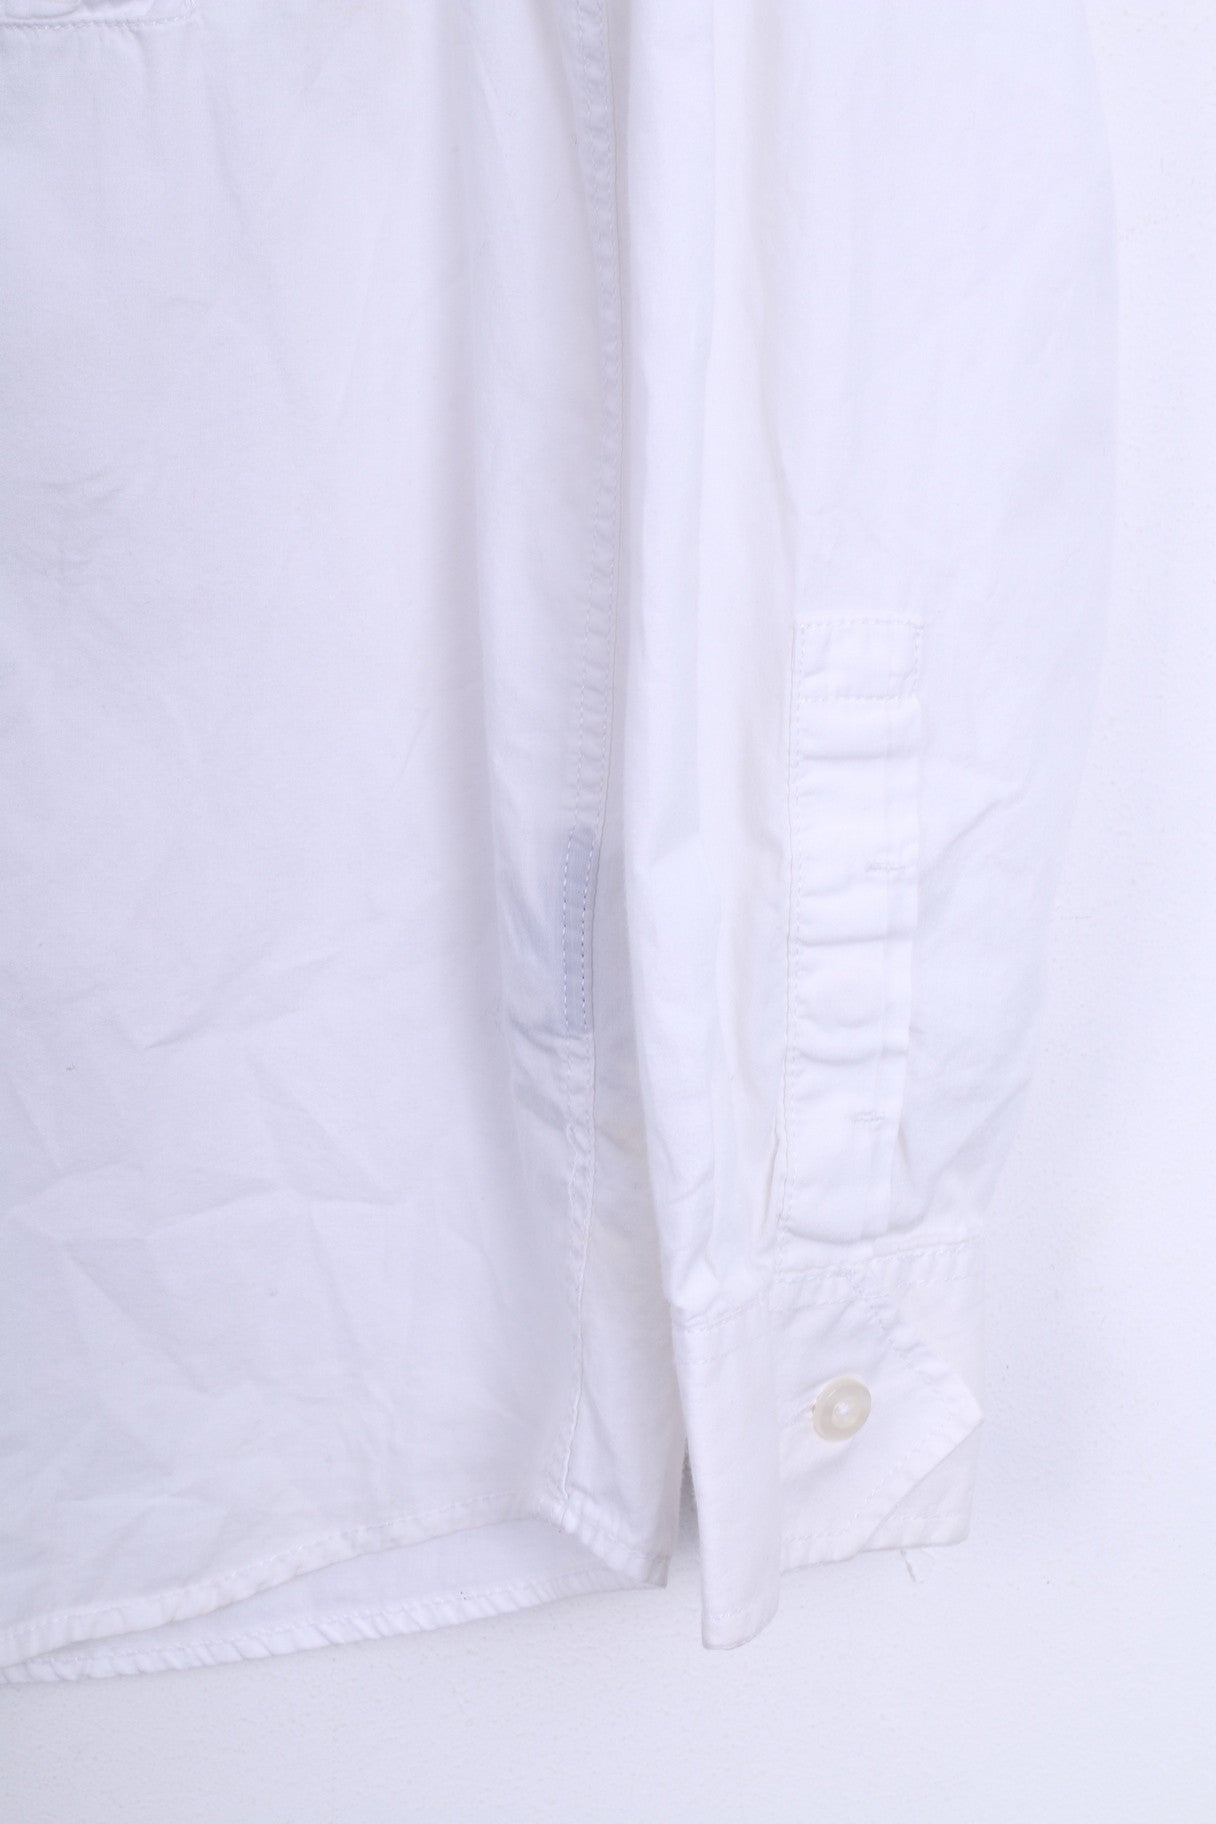 Duck and Cover Mens M Casual Shirt White Long Sleeve Cotton